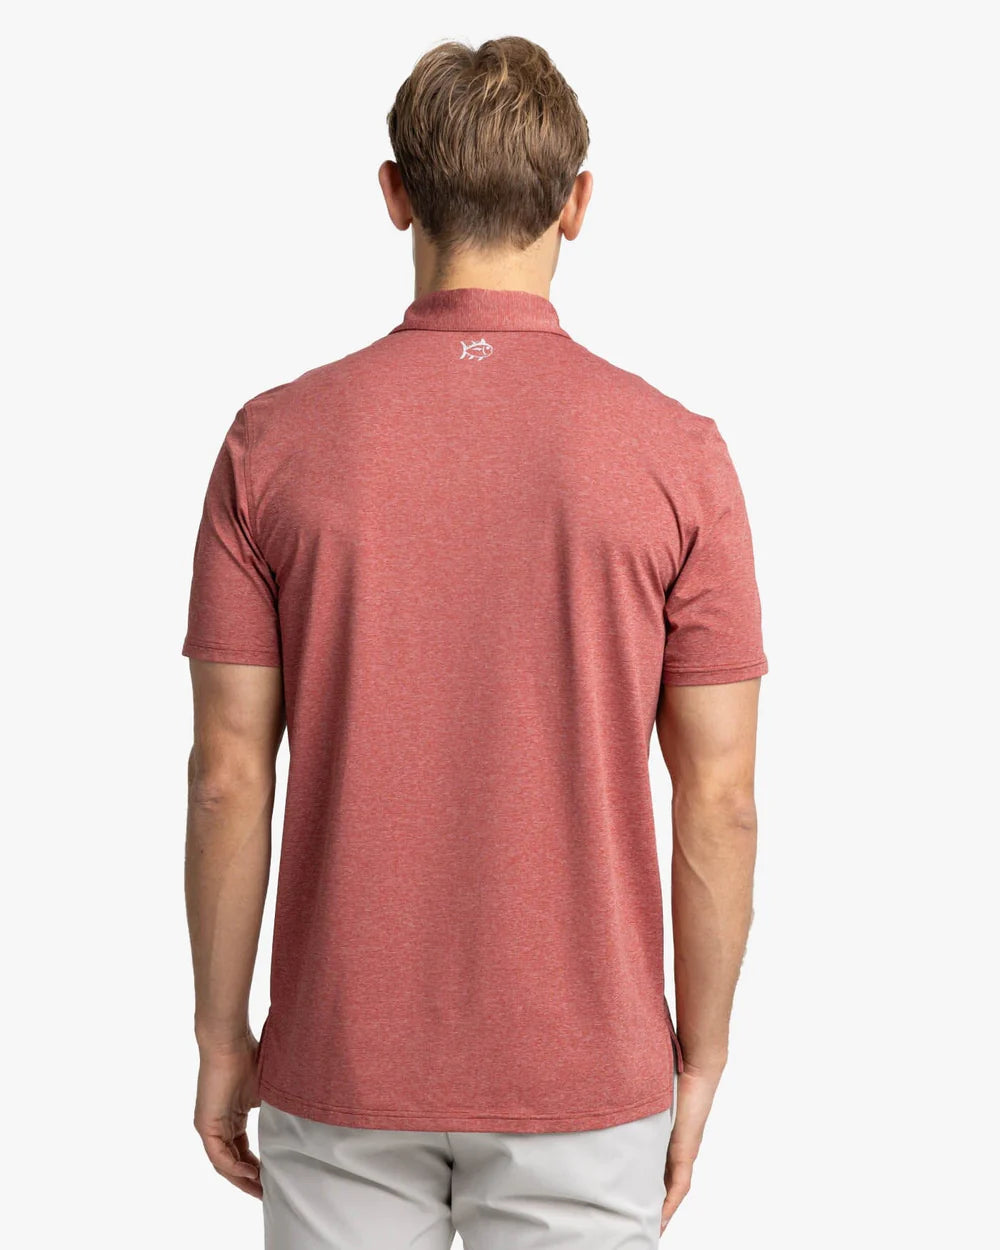 Southern Tide Brreeze Performance Polo - Heather Tuscany Red